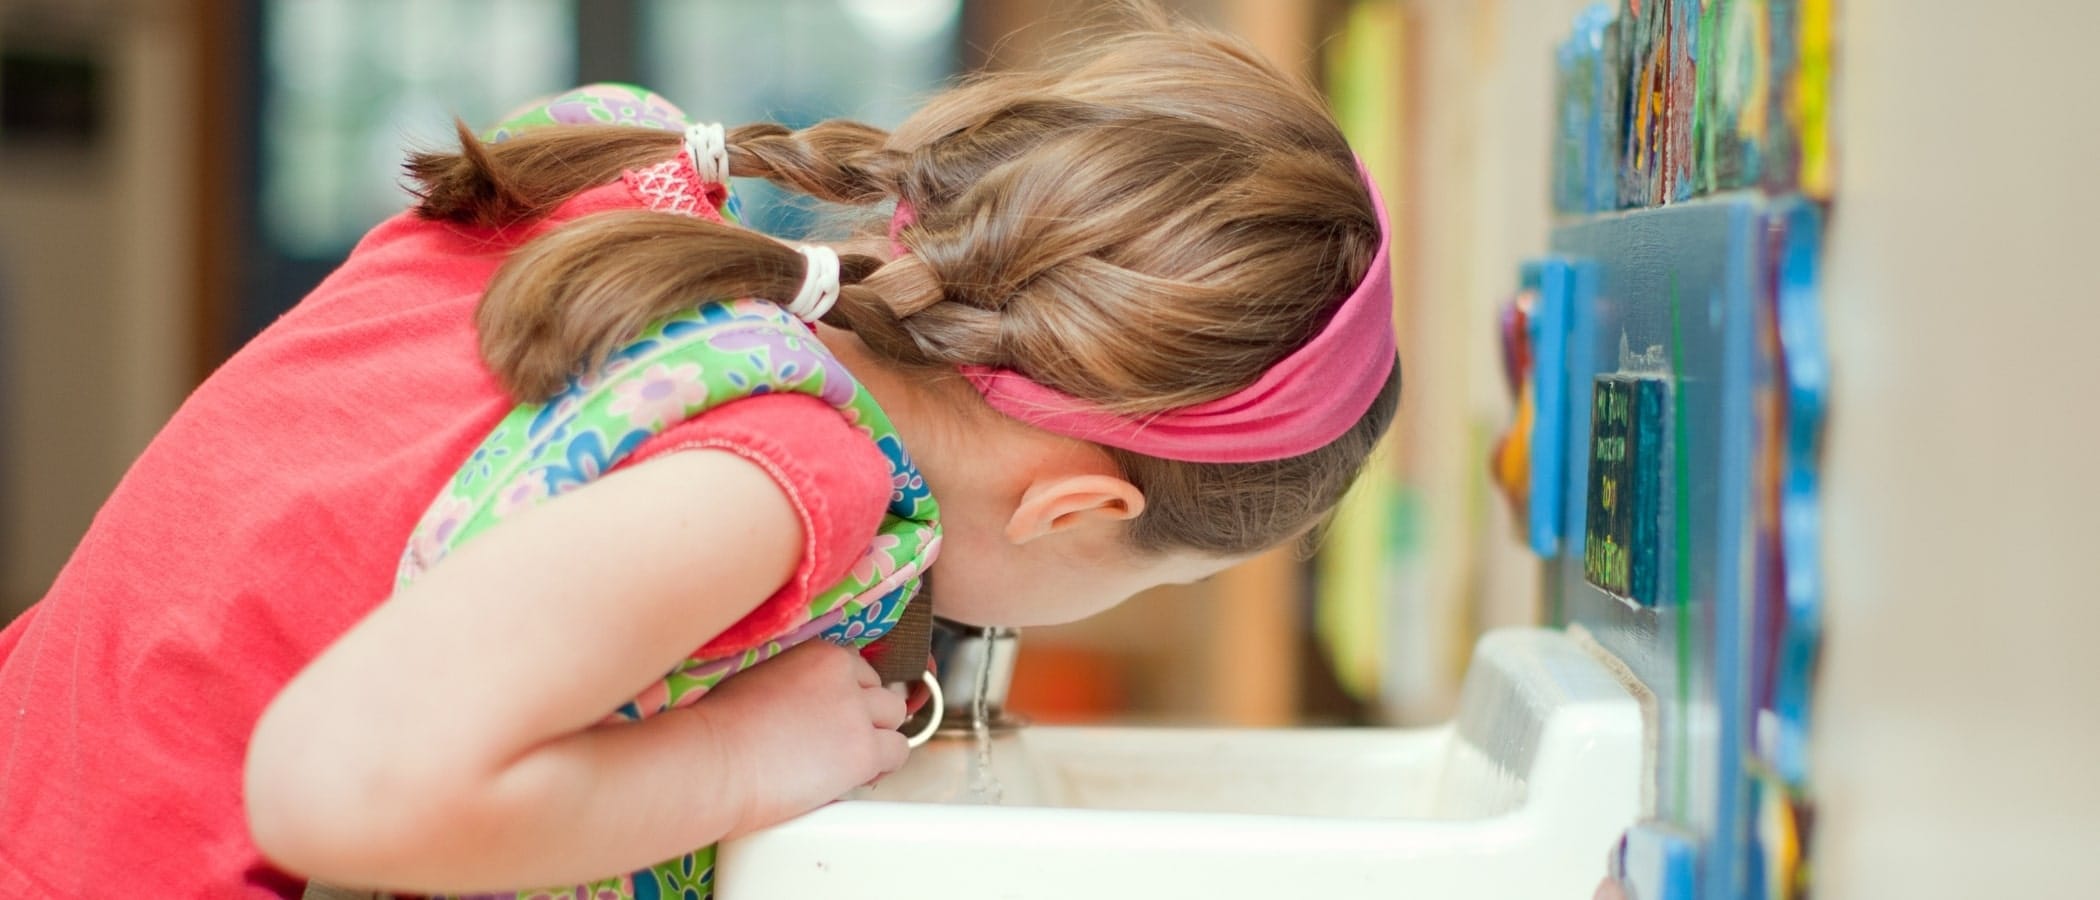 Girl Drinking From School Water Fountain